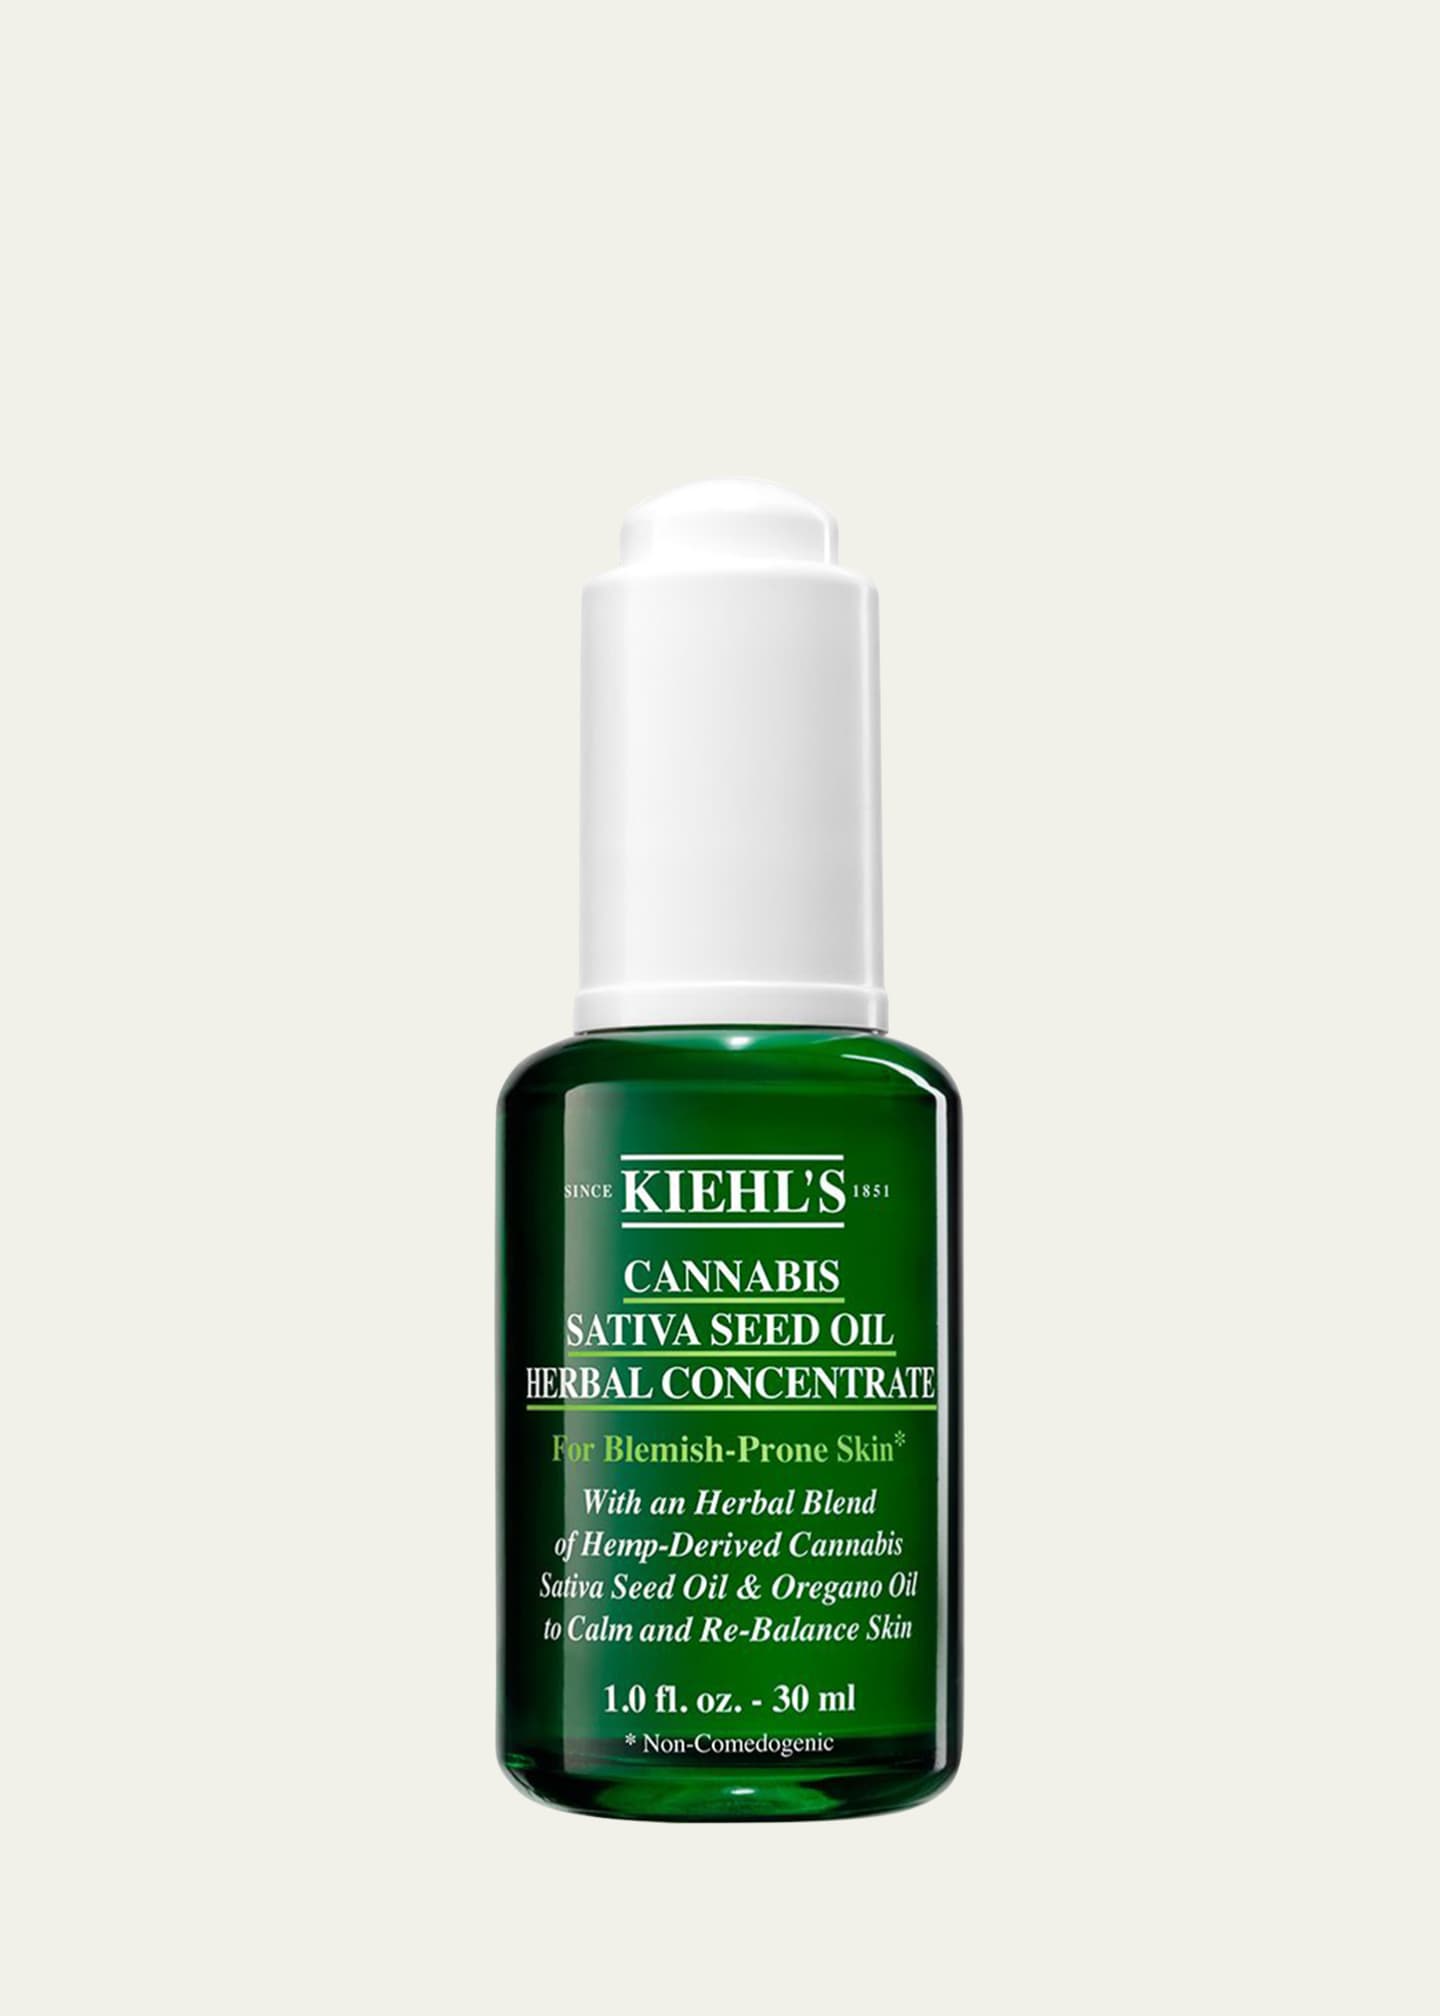 Kiehl's Since 1851 Cannabis Sativa Seed Oil Herbal Concentrate, 1 oz. Image 1 of 5